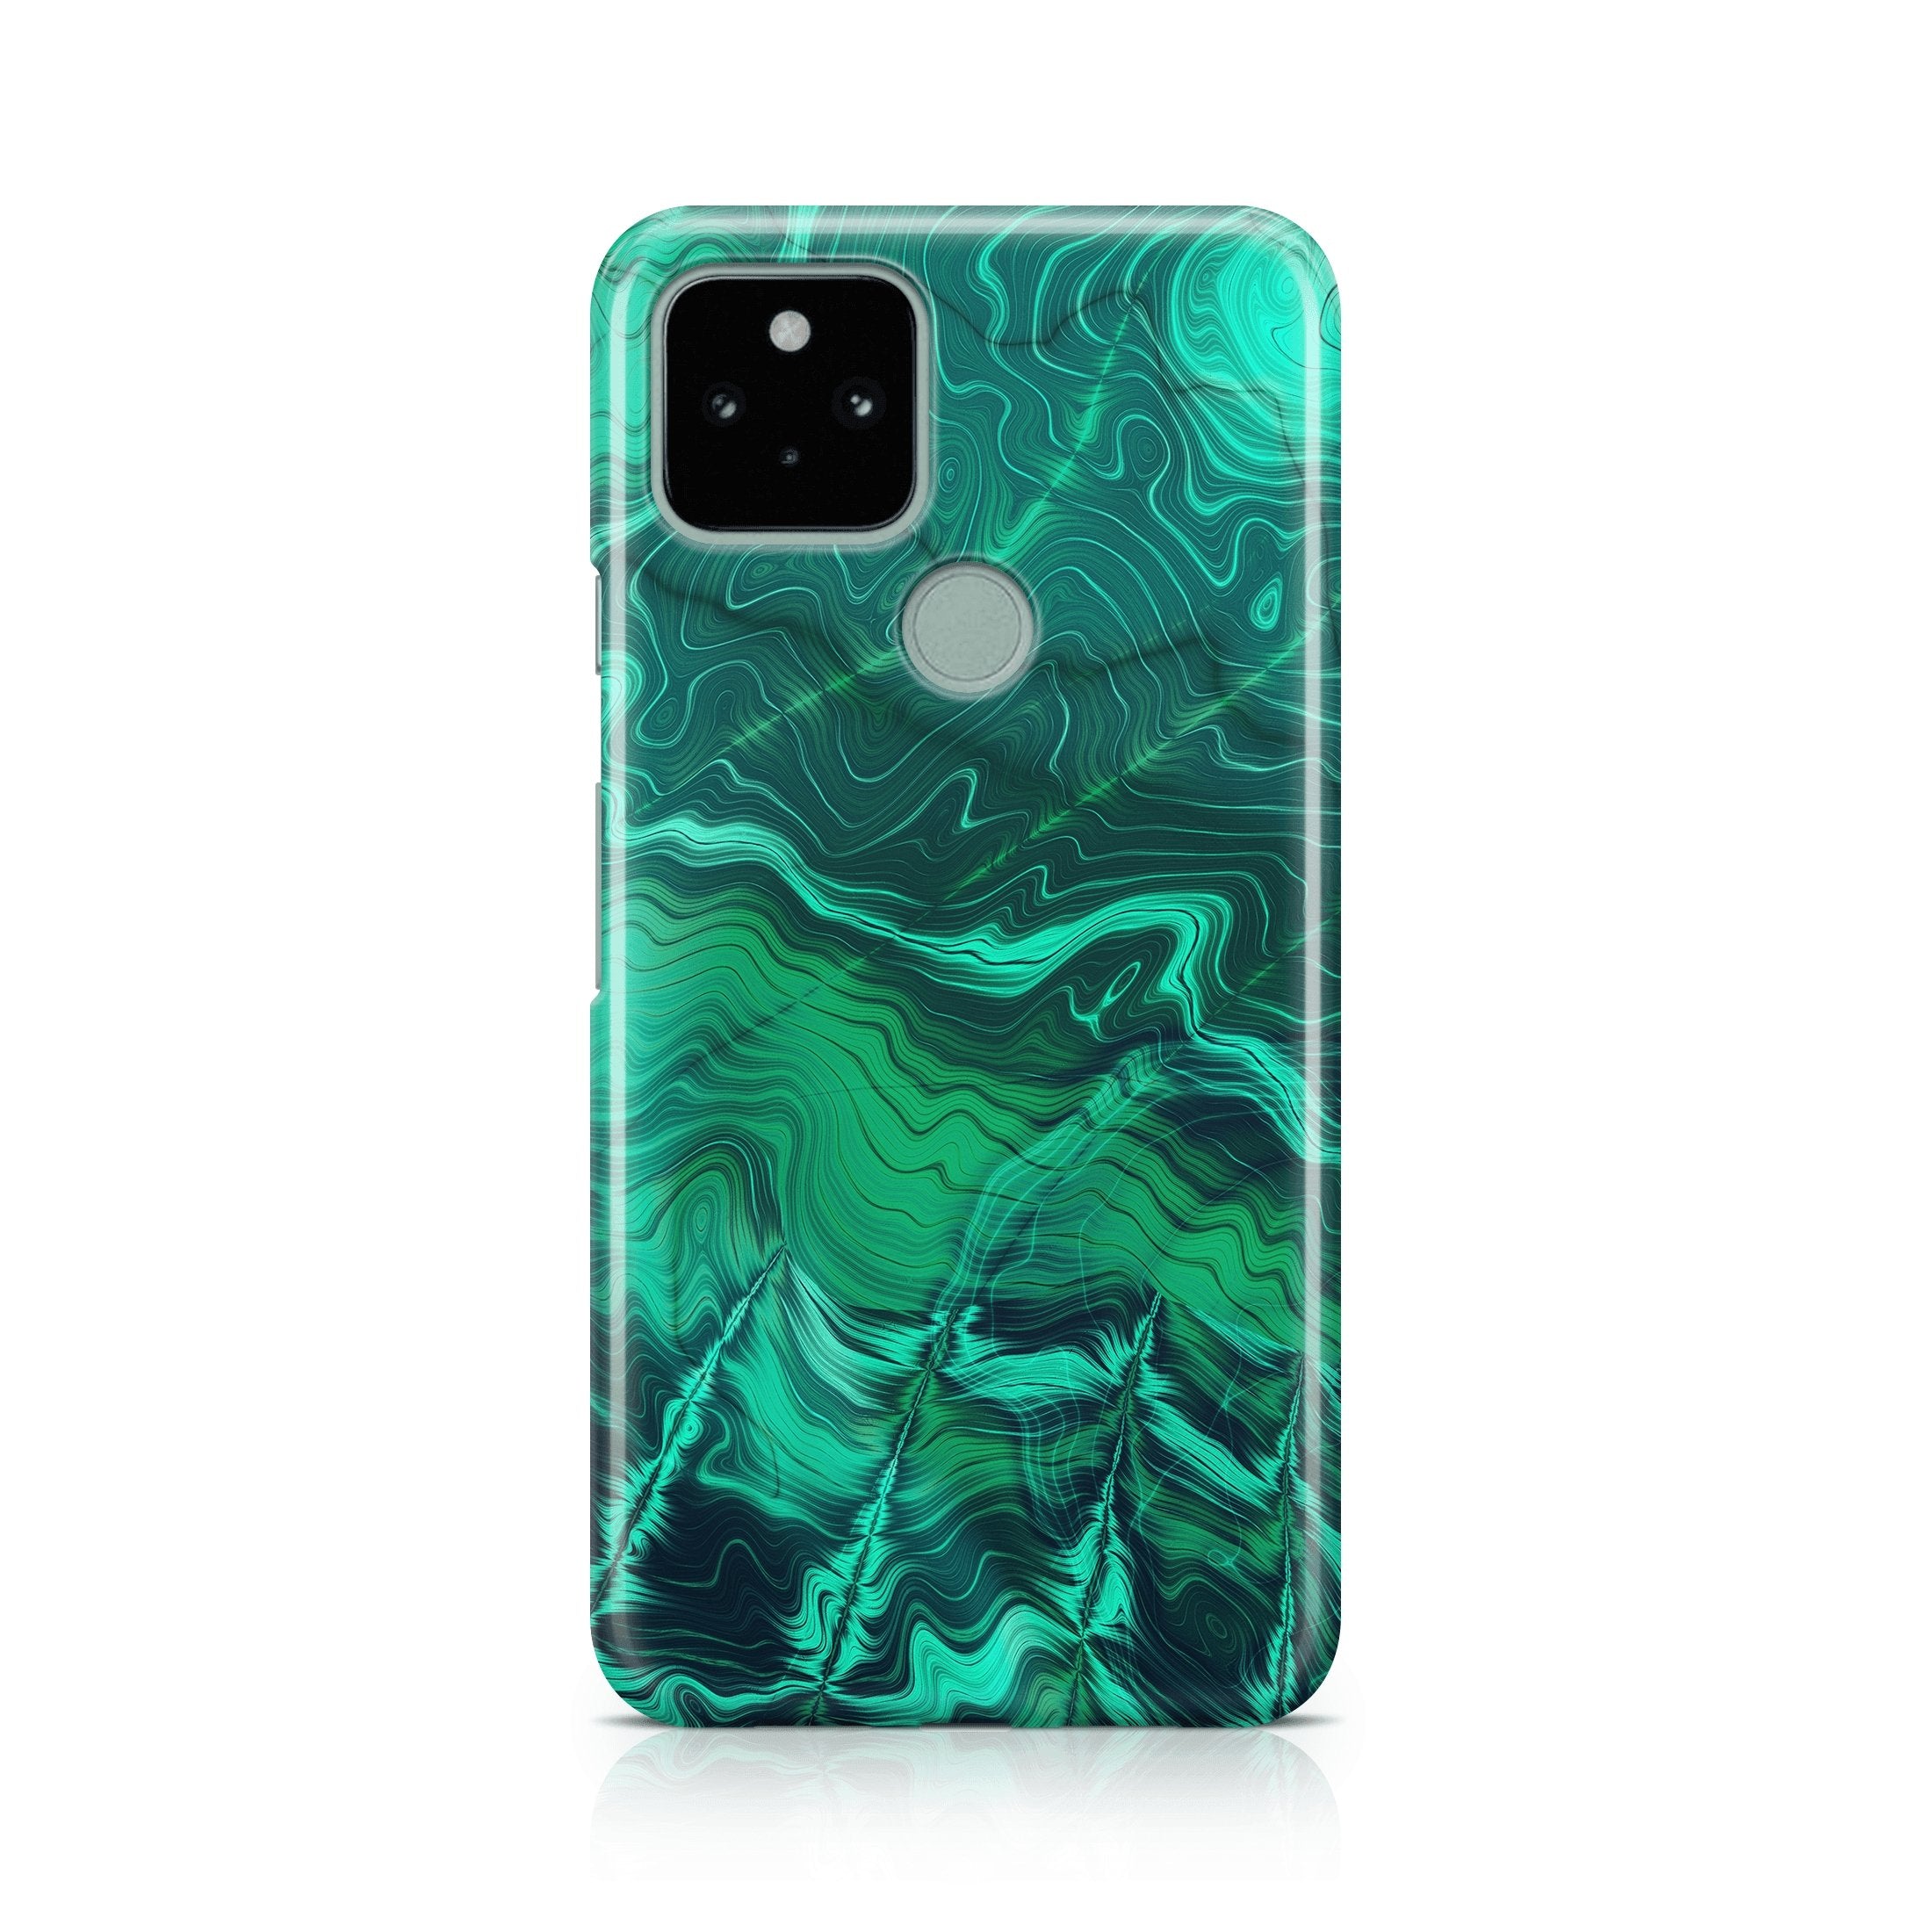 Malachite III - Google phone case designs by CaseSwagger